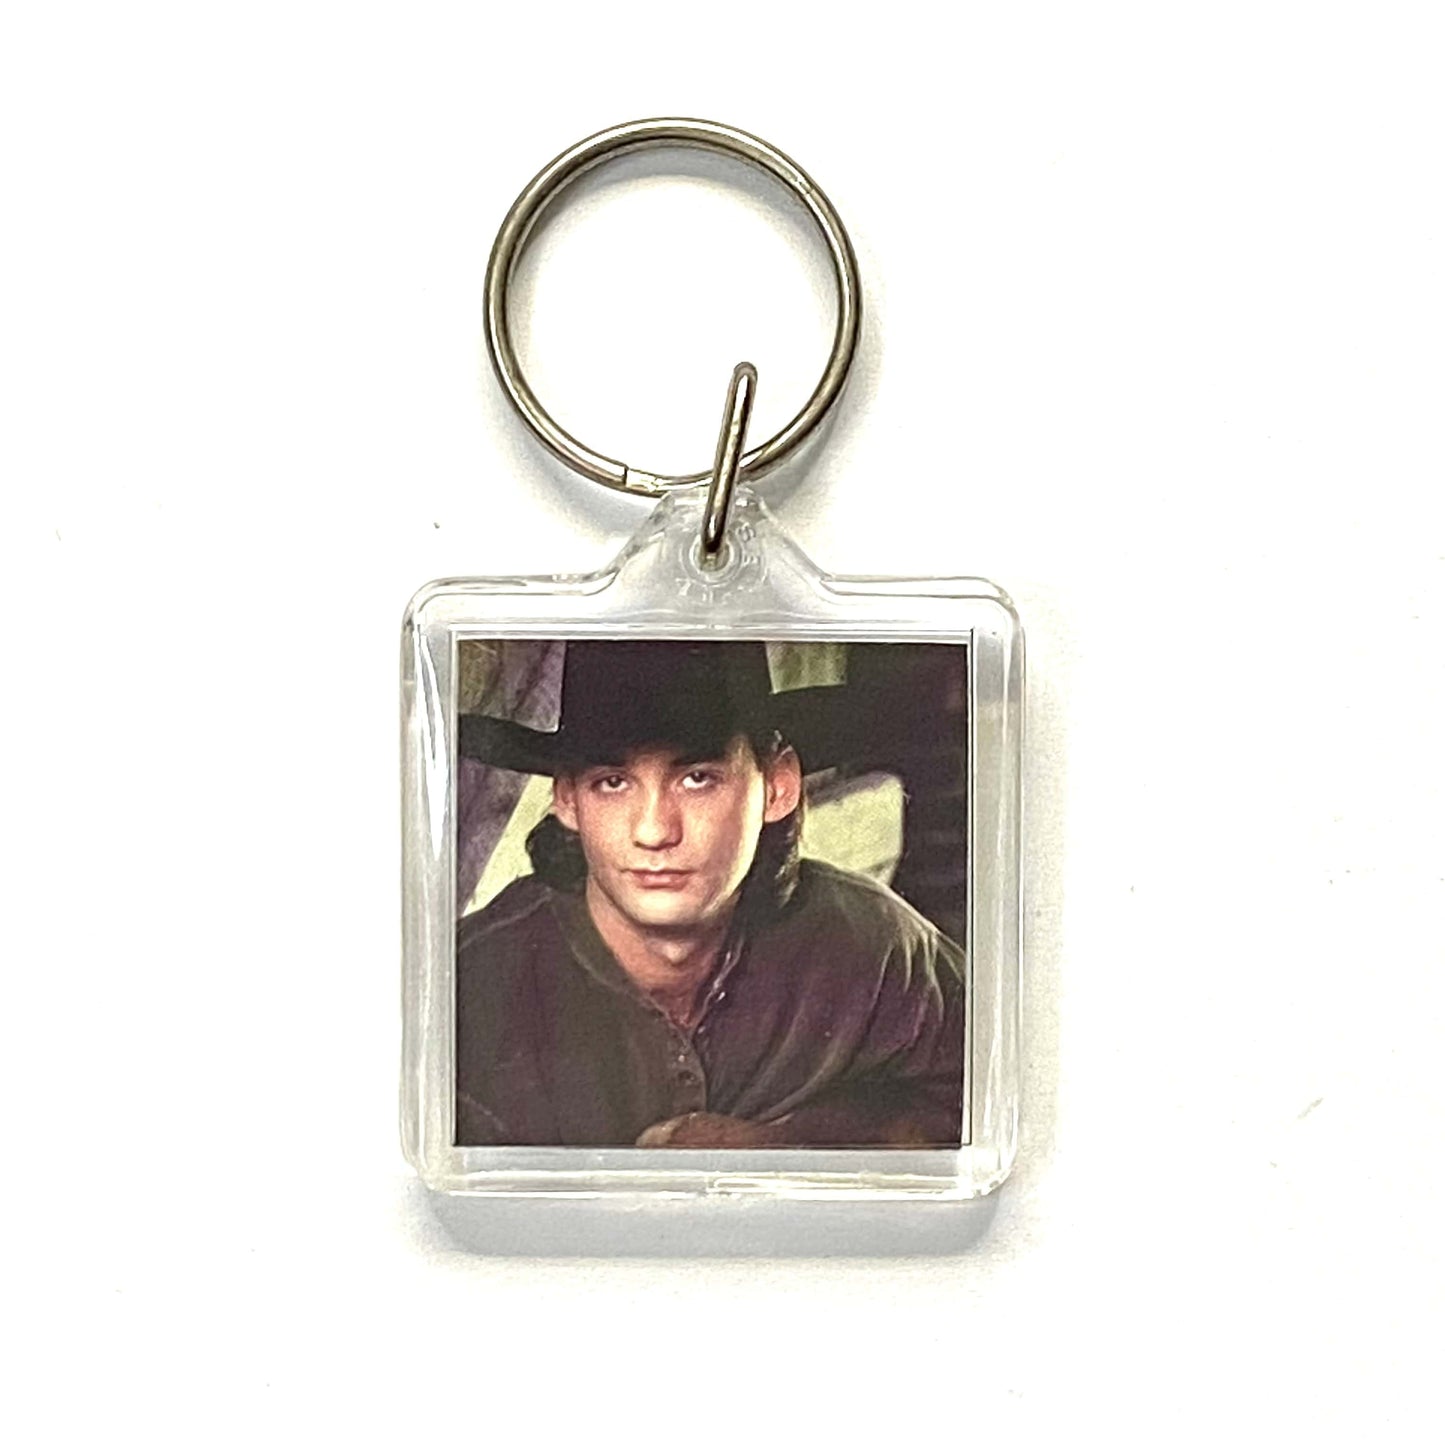 Vintage Wade Hayes "Old Enough To Know Better" Travel Souvenir Keychain Key Ring Square Clear Acrylic